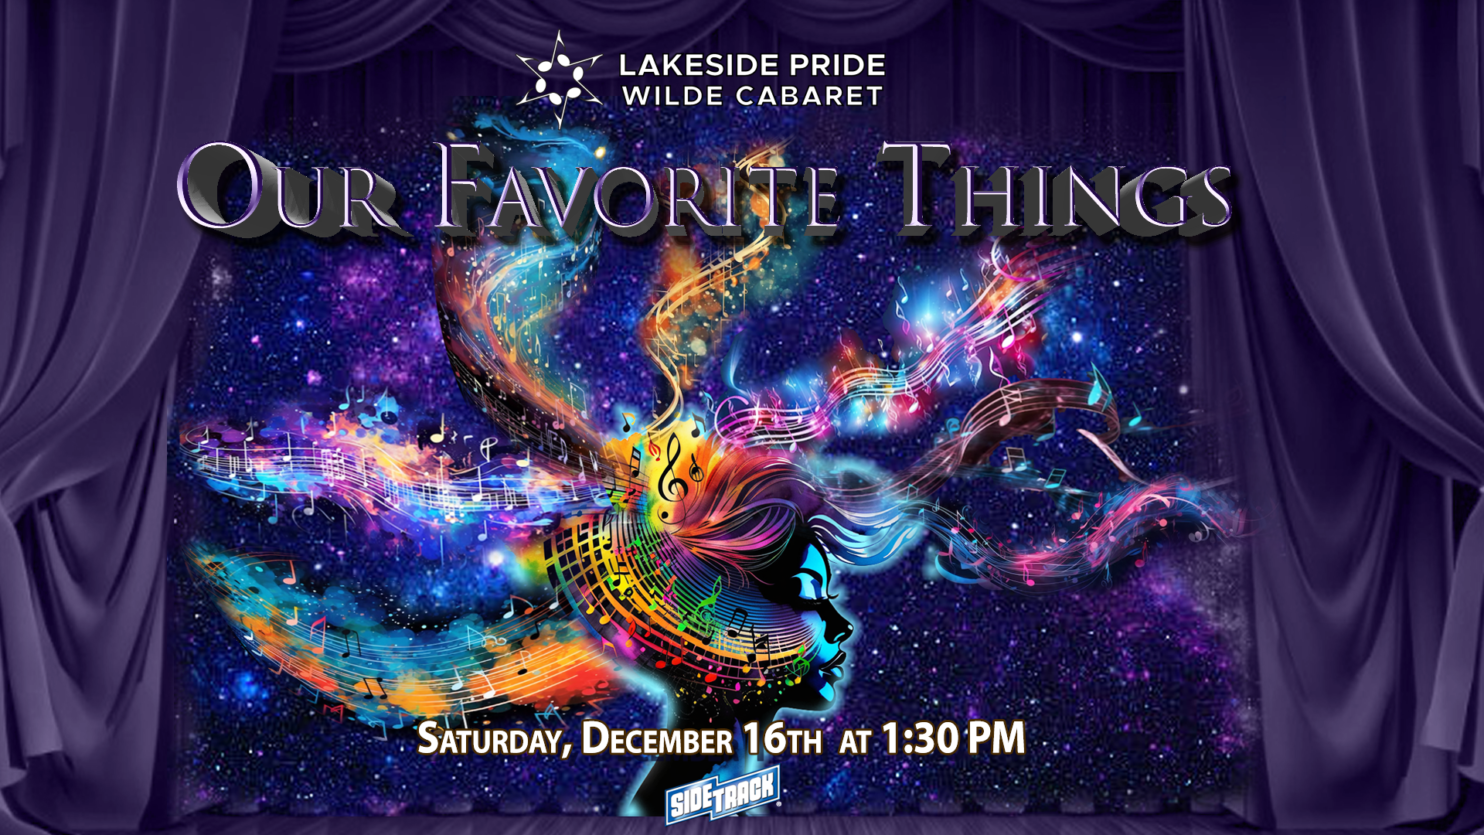 Purple curtain stage background with a center image of a person's side profile with colors and galaxy like swirl of stars and music notes coming out of the head, also featuring the top text of Lakeside Pride Wilde Cabaret, title of the show "Our Favorite Things," and Sunday December 16th 1:30 pm at Sidetrack